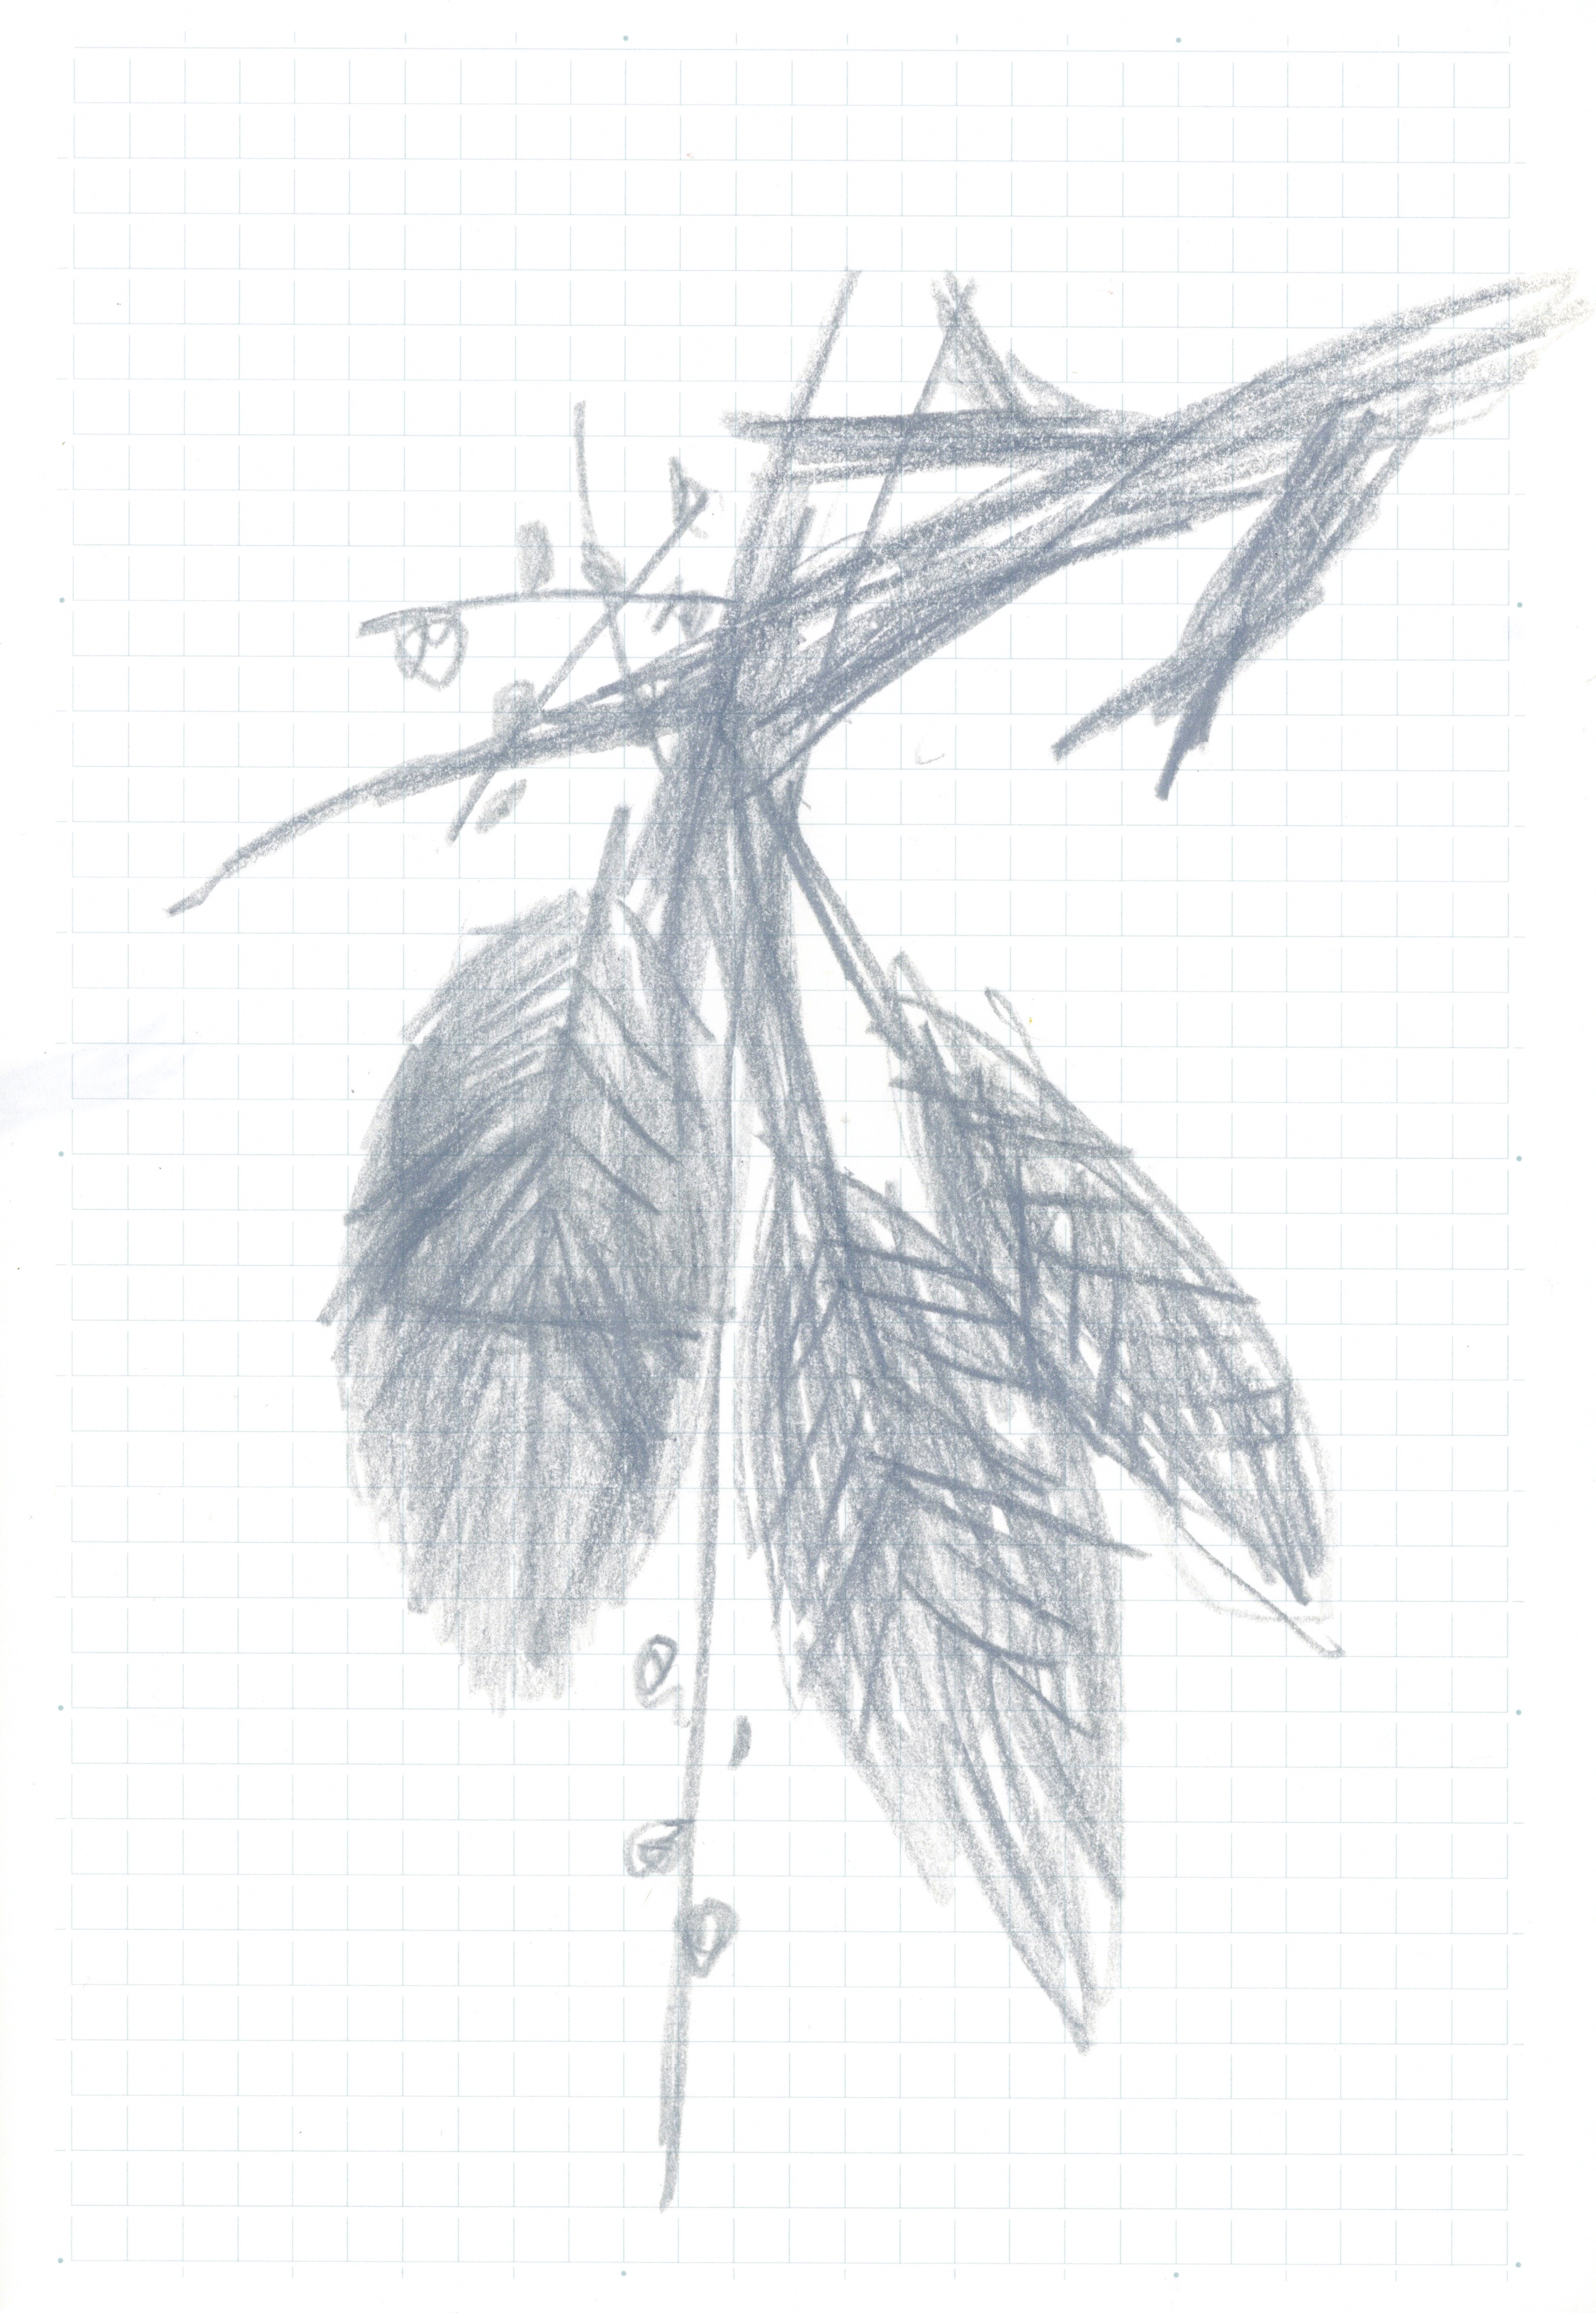 pencil drawing of a branch with three leaves and berries